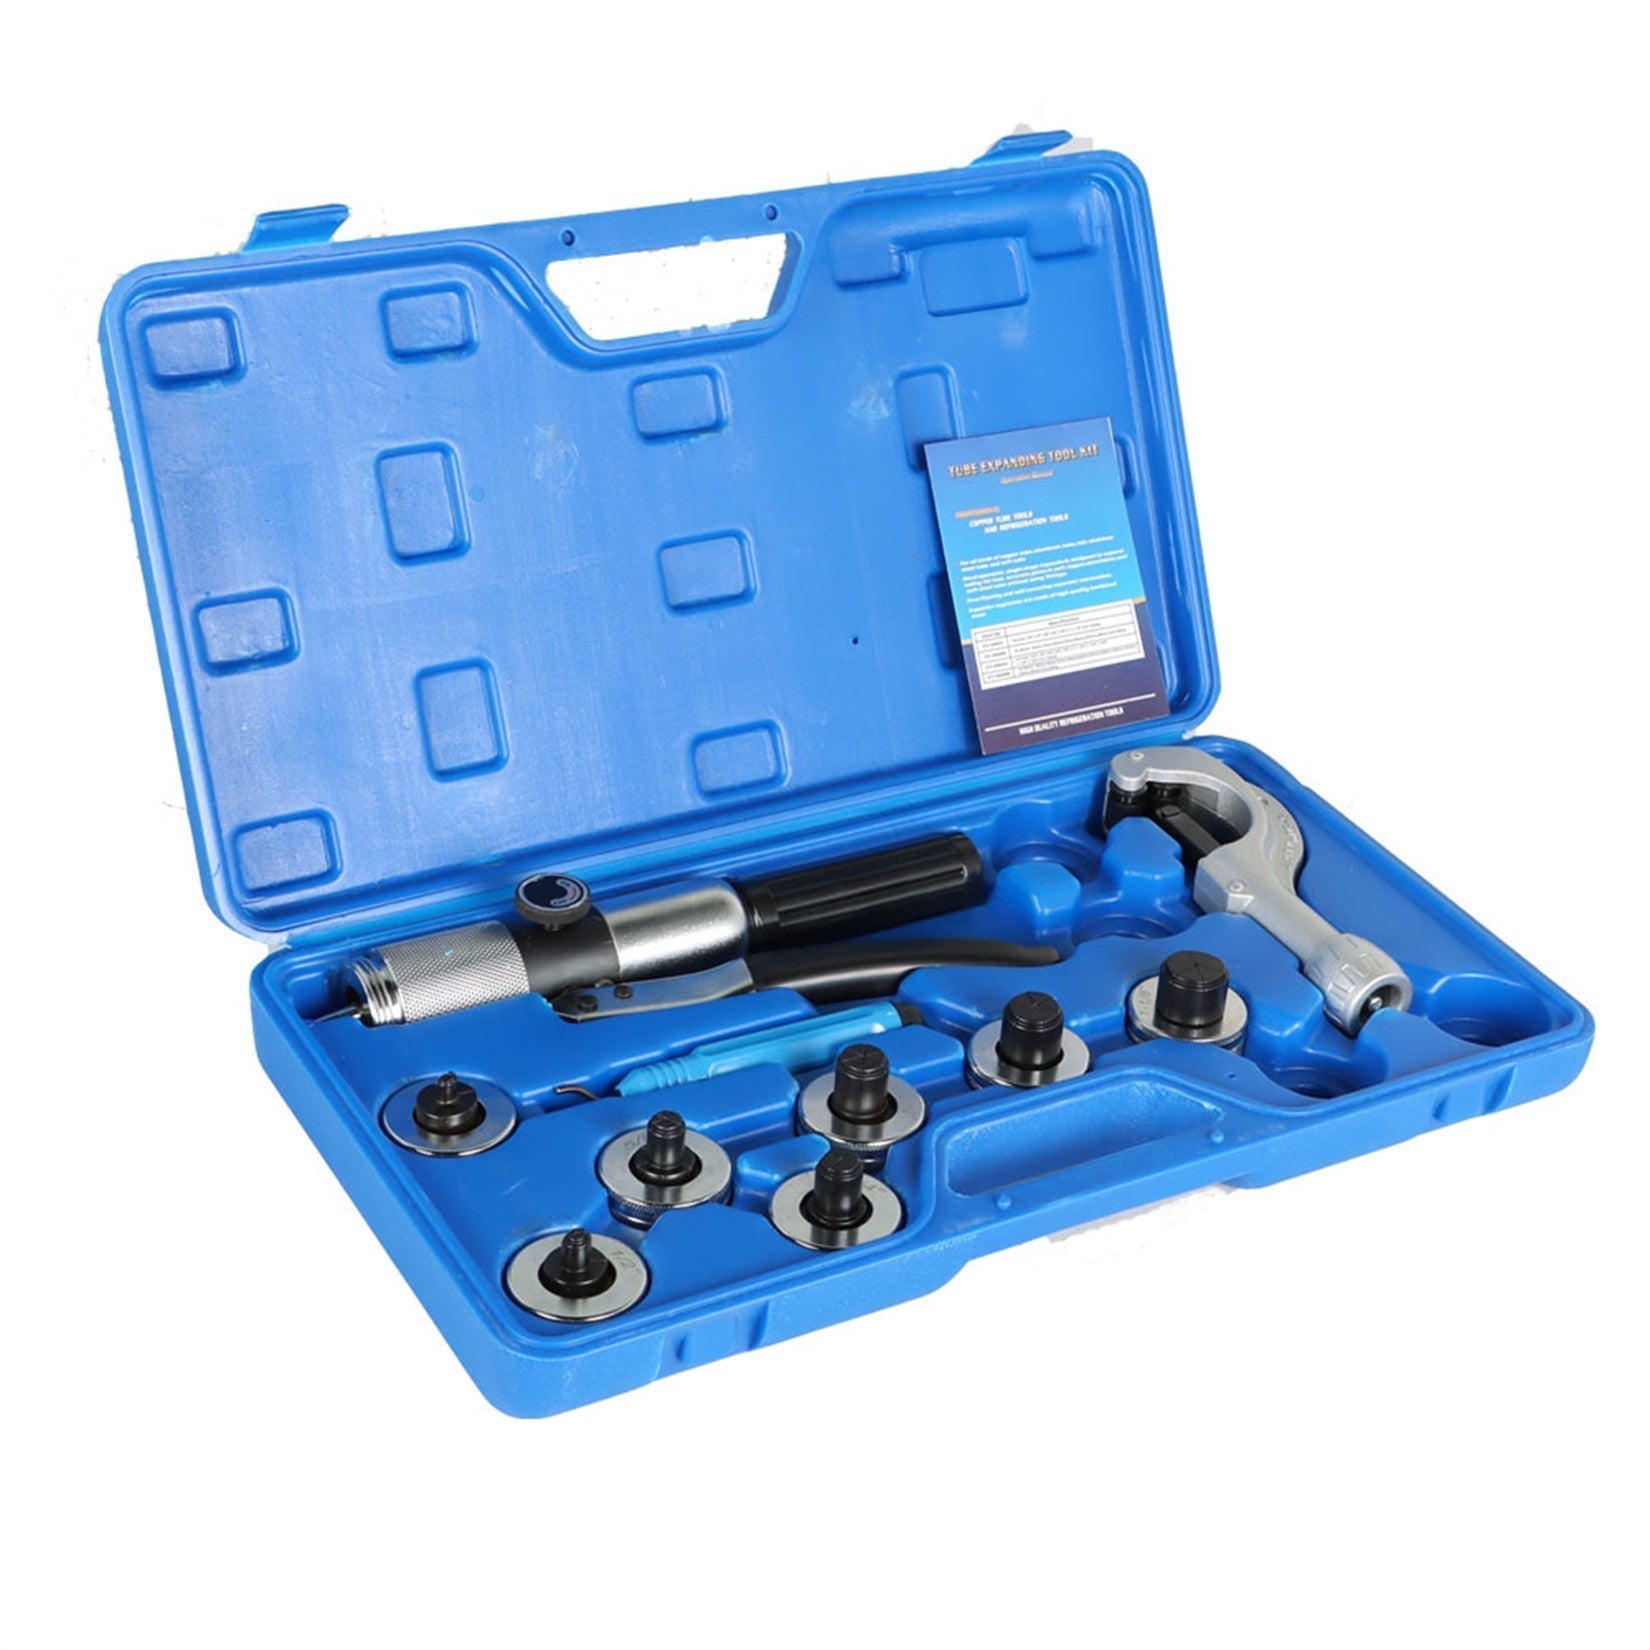 Hydraulic Tube Expander Compact Swaging Tool Kit with Tube Cutter, Deburring Tool and Expander Heads for to 1-1 Inches Copper Pipes